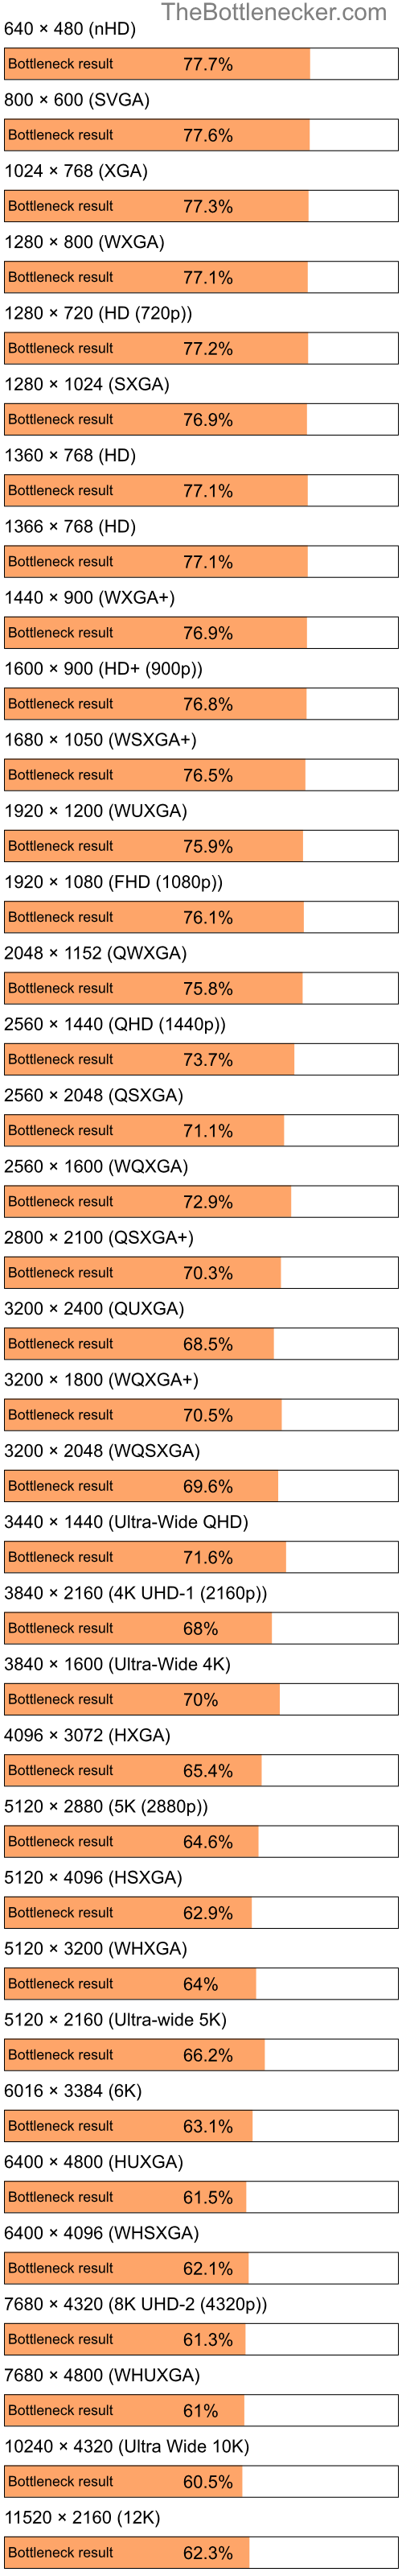 Bottleneck results by resolution for AMD Athlon XP 3000+ and NVIDIA GeForce GTX 1660 SUPER in Graphic Card Intense Tasks